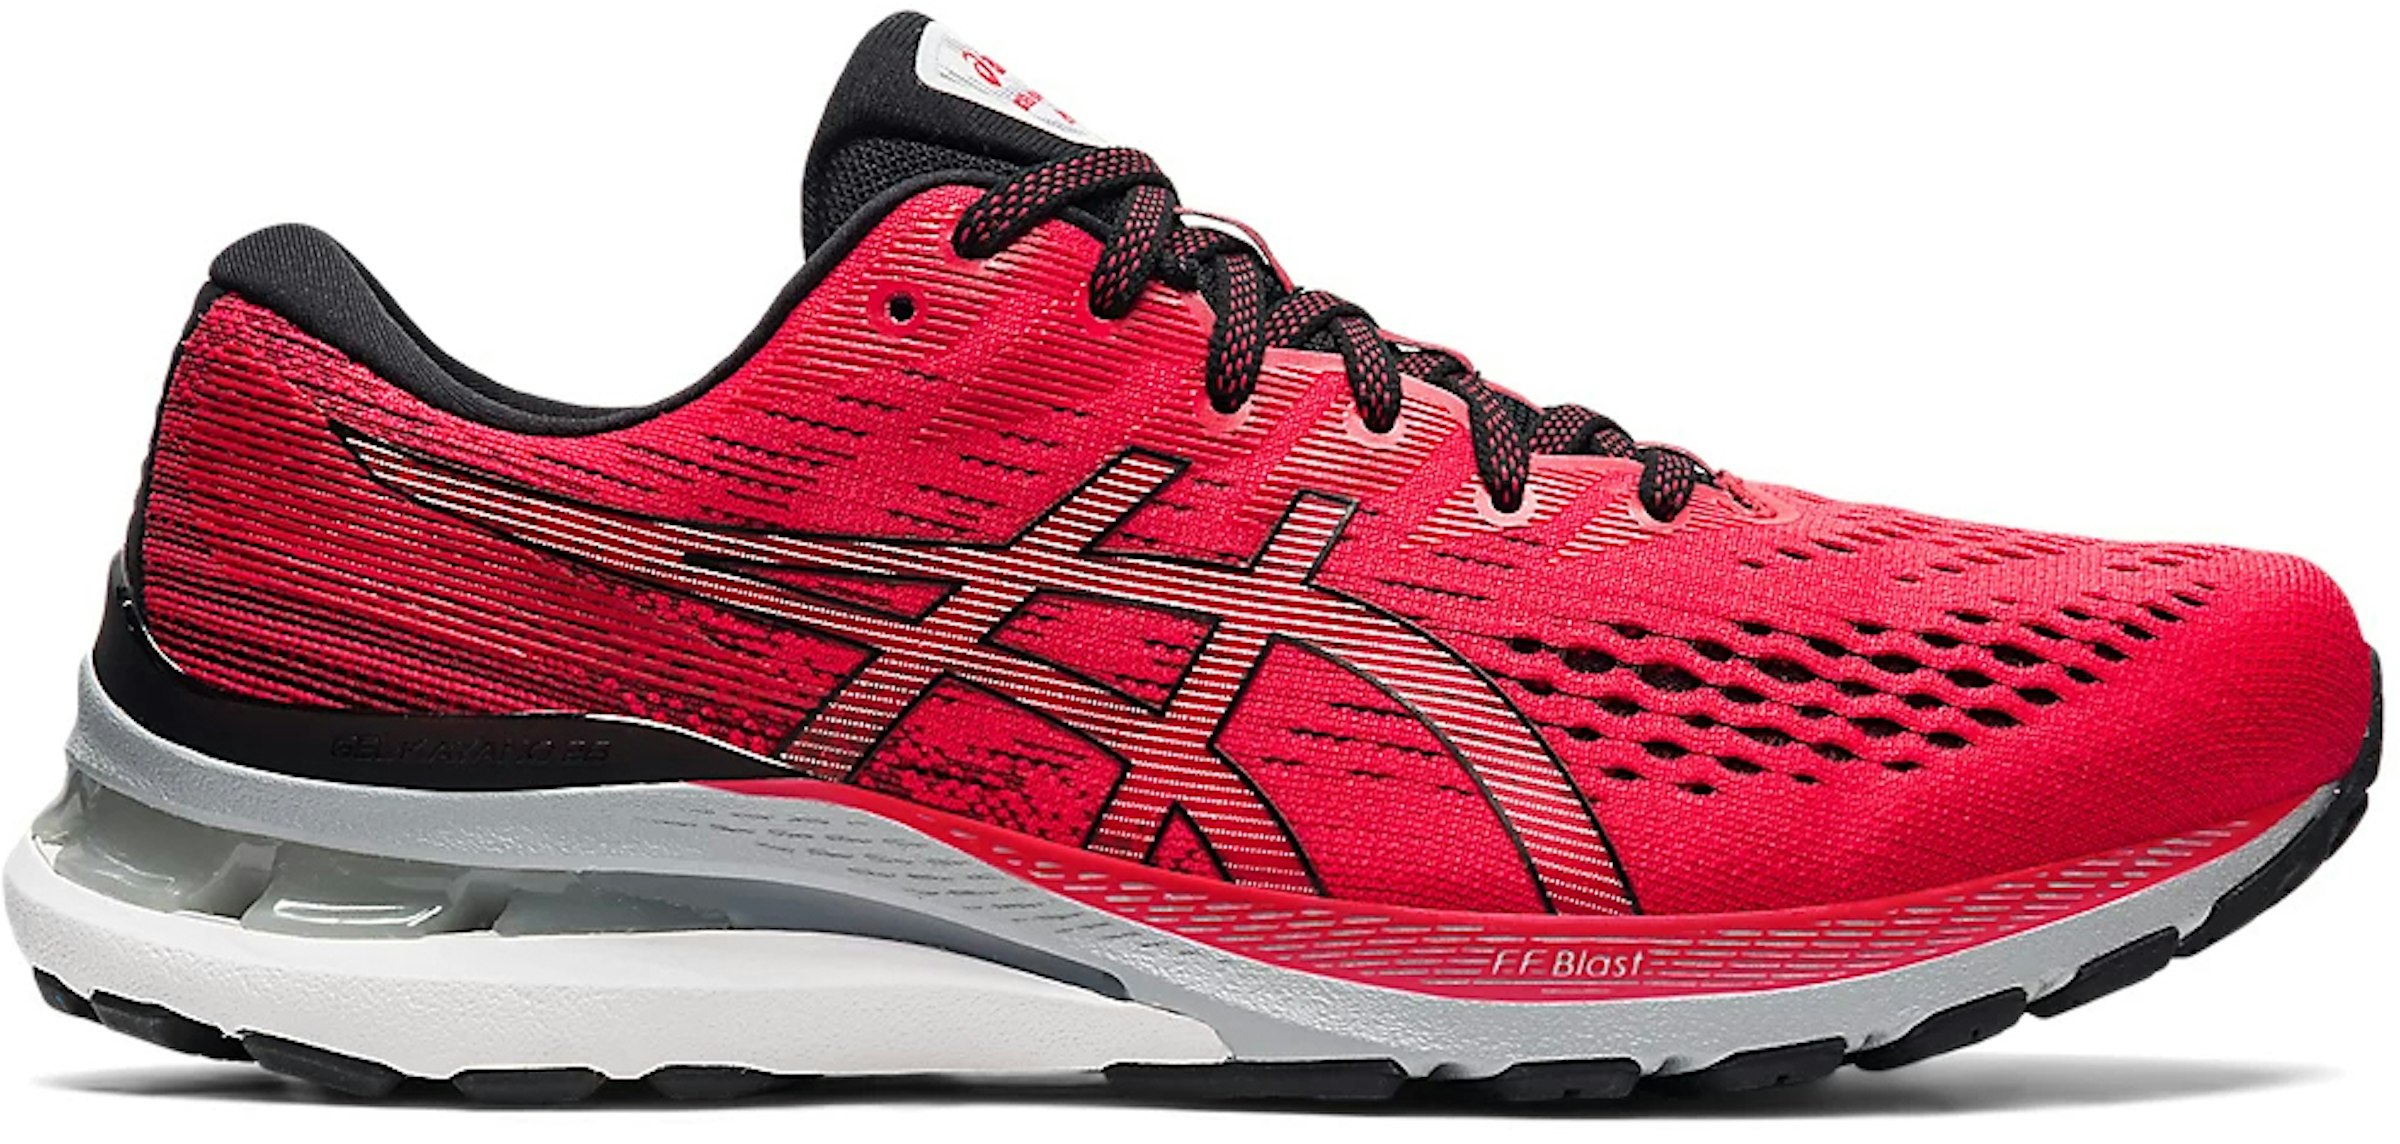 ASICS Gel-Kayano Electric Red Hombre - 1011B189-600